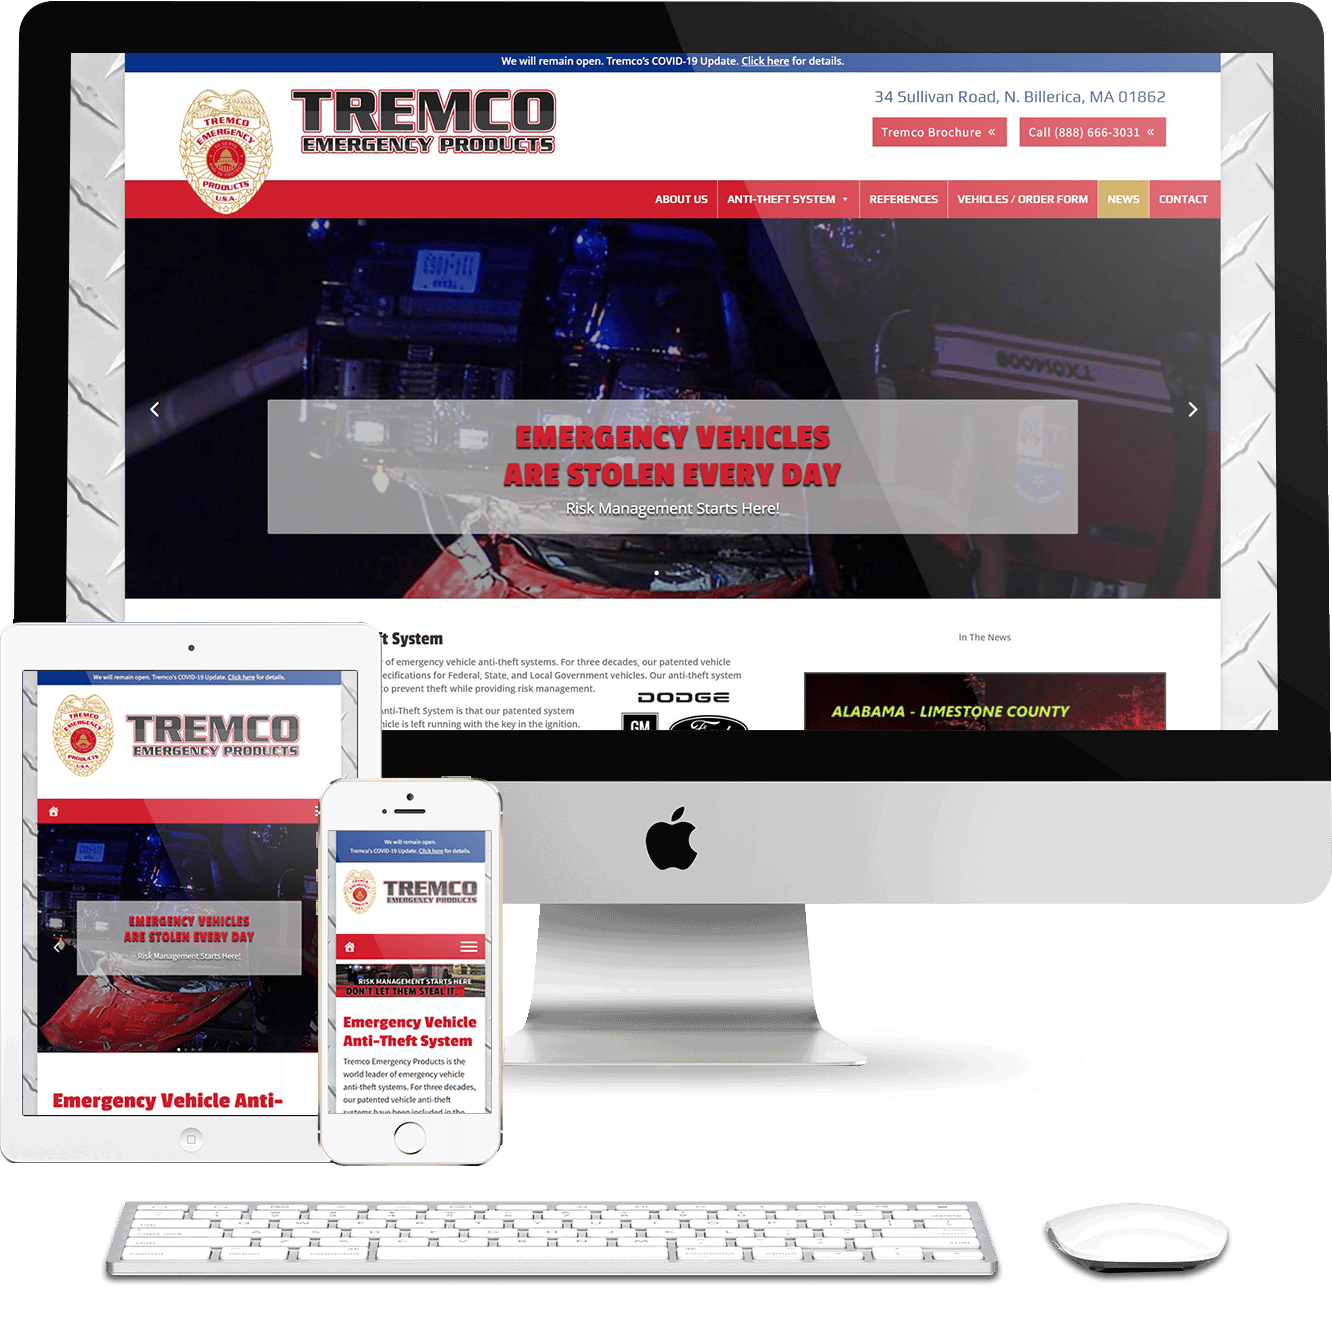 Tremco Emergency Products